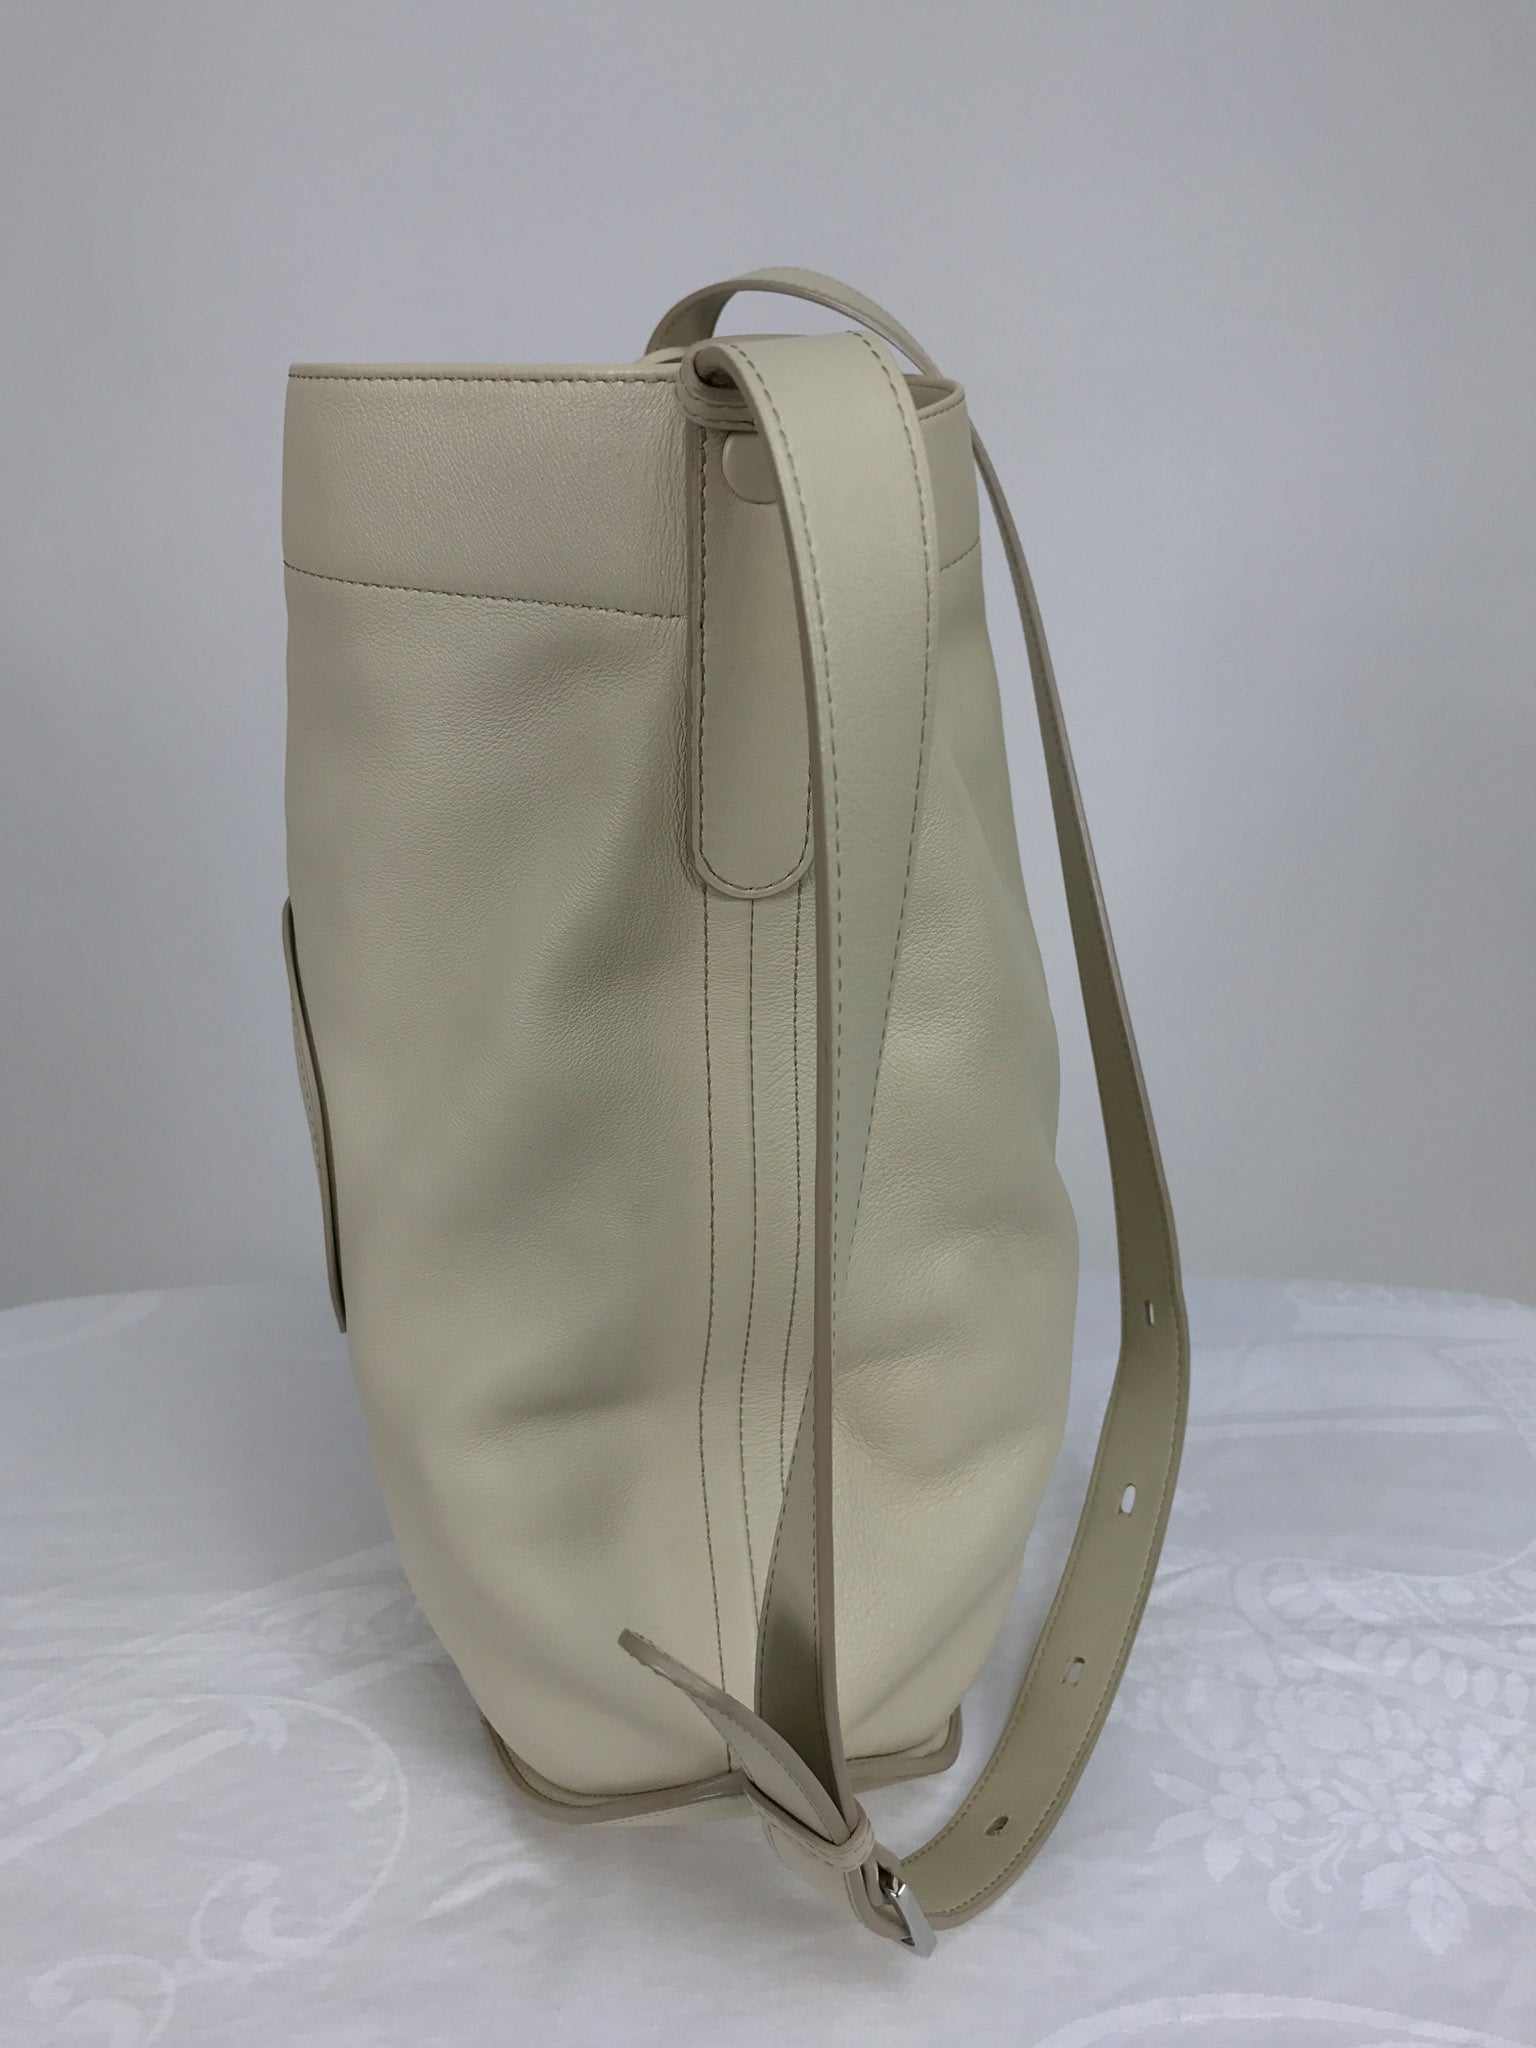 SOLD Delvaux Ivory Leather Pin Holdall Shoulder Bag – Palm Beach